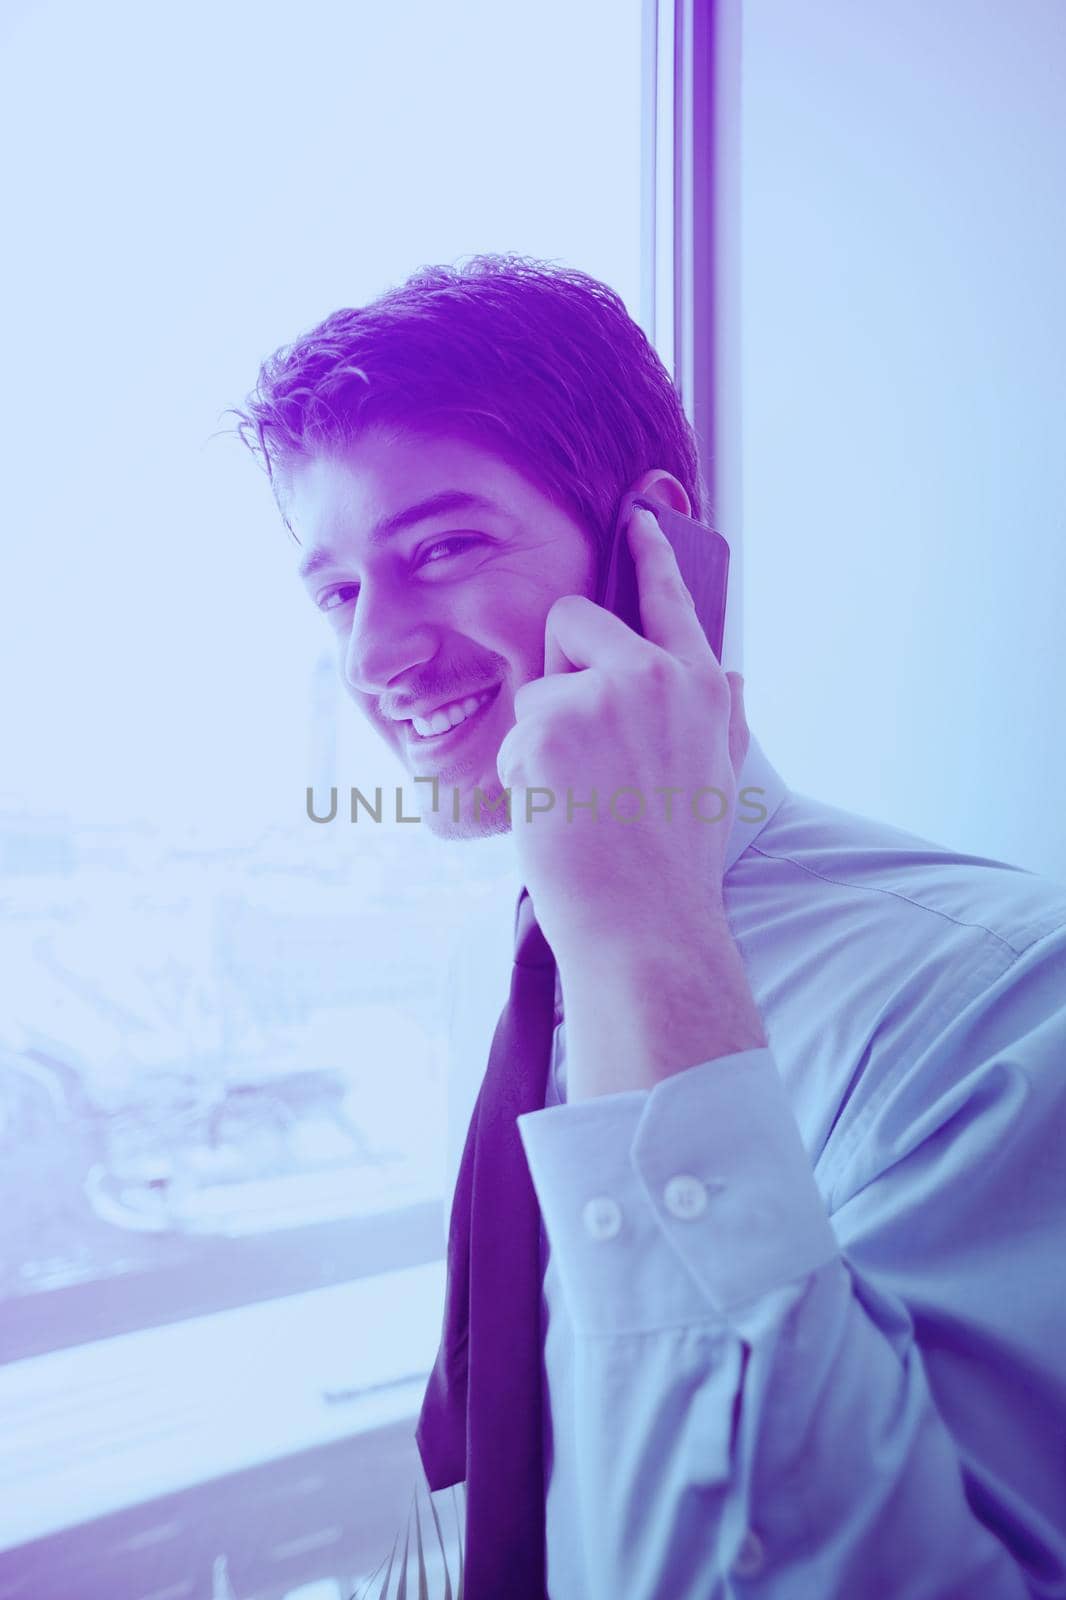 business man talking by cellphone in office